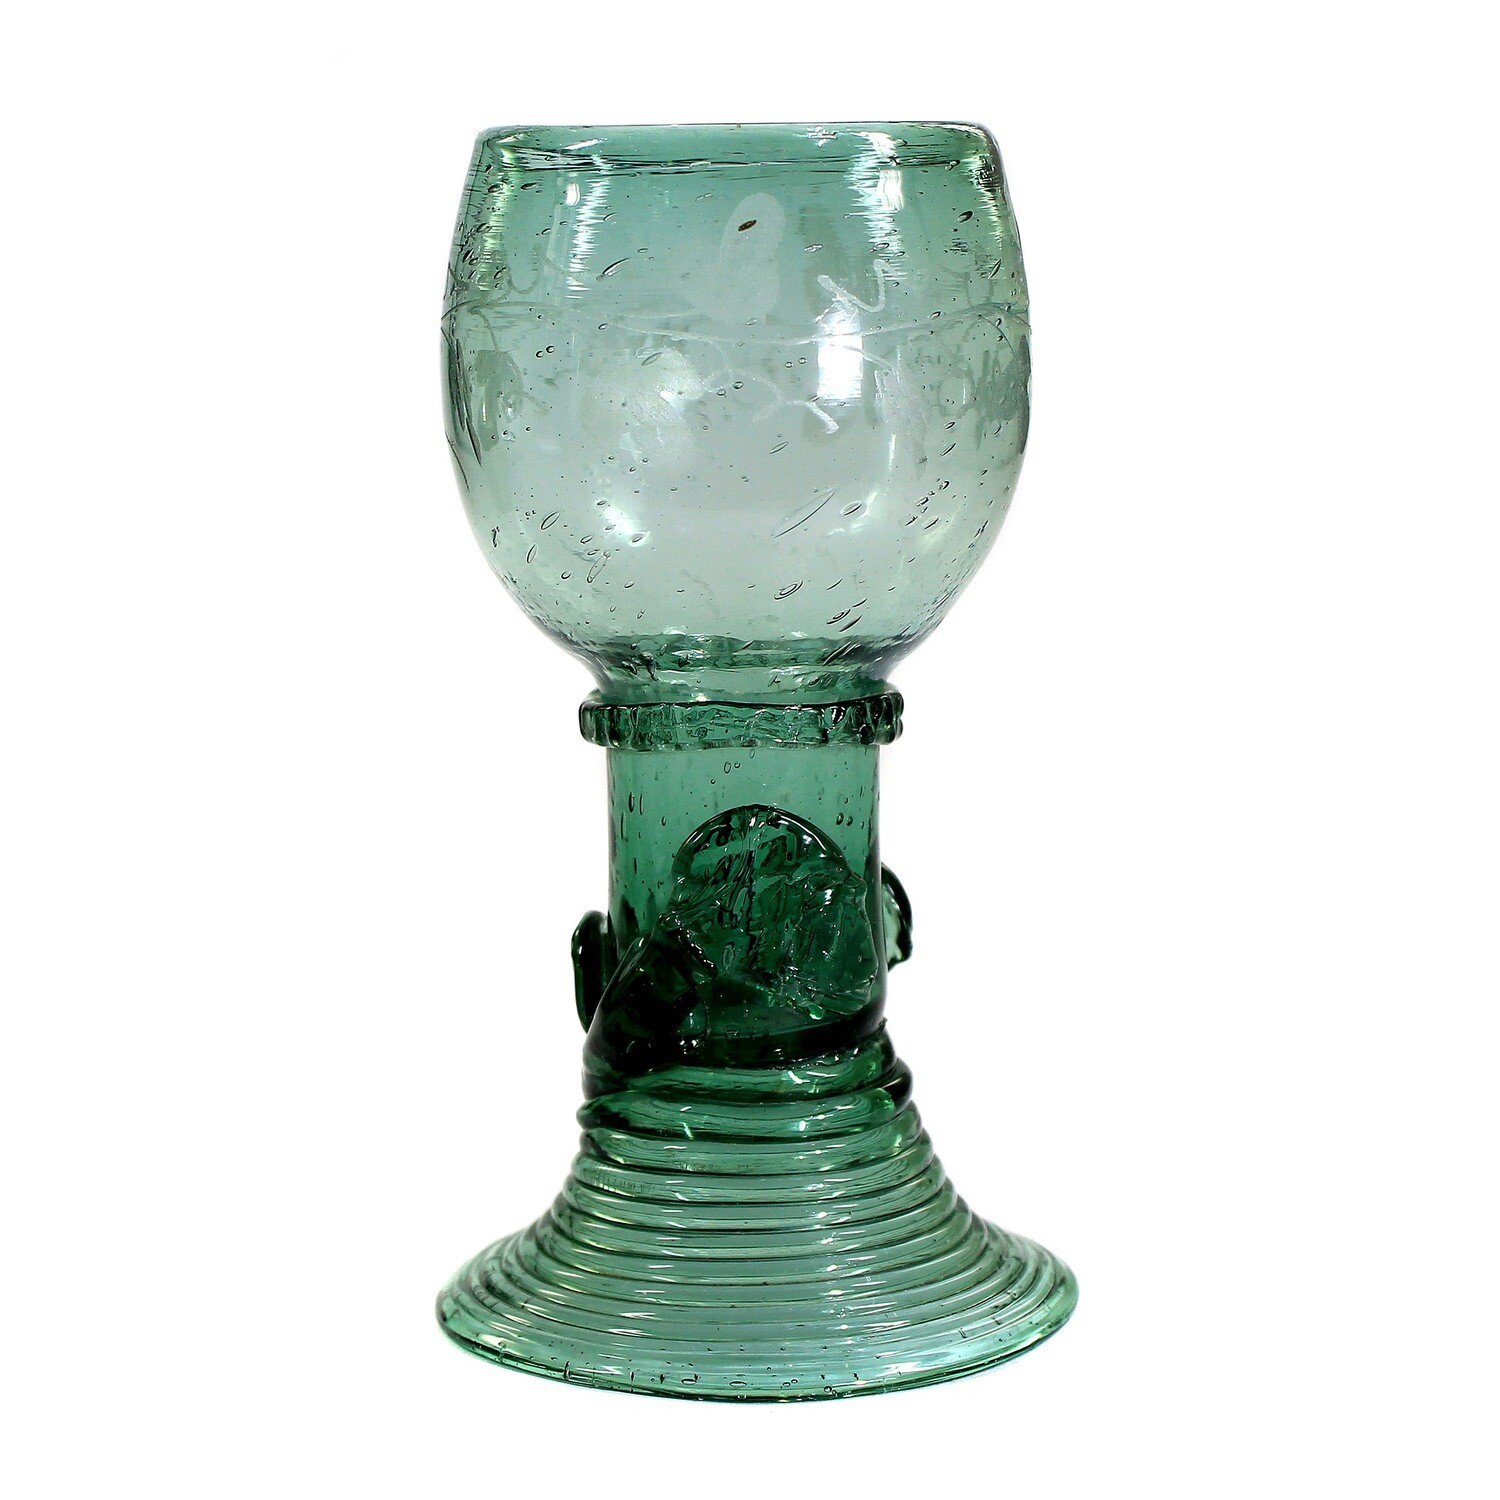 Roman made of light green glass with applied nubs and vines, end of the 18th century.